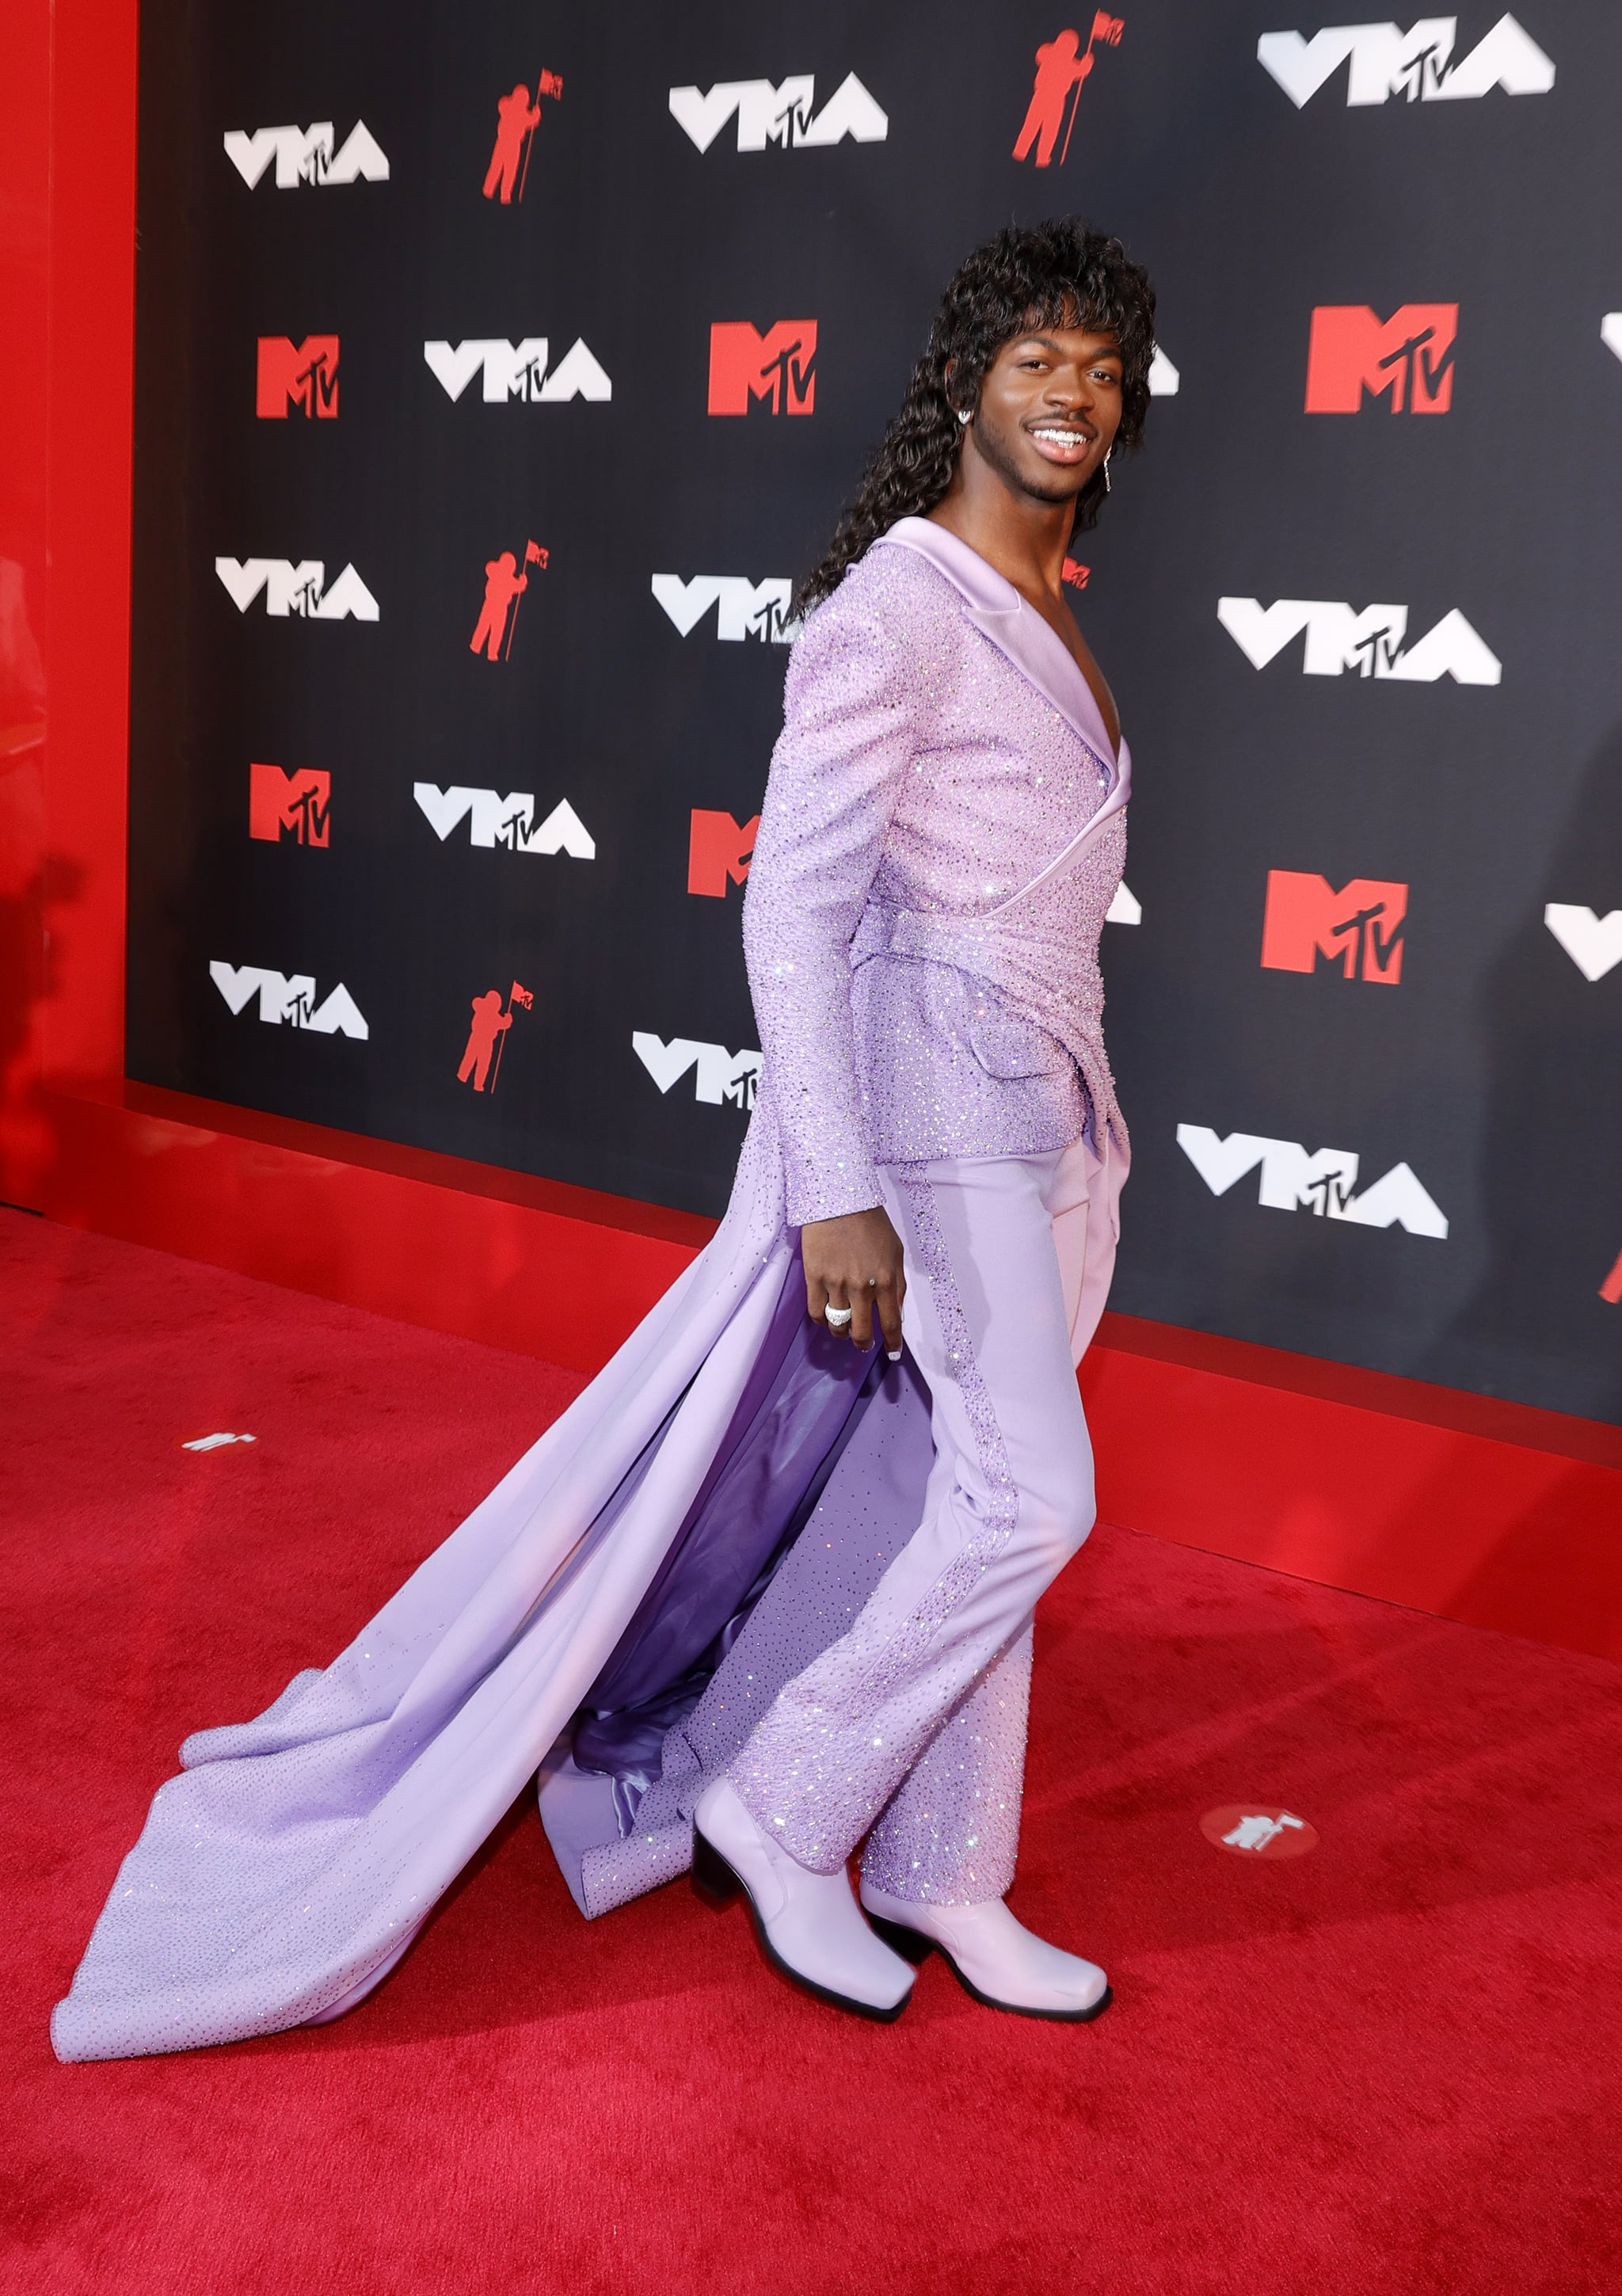 Fashion, Shopping & Style | Lil Nas X Lit the VMAs Red Carpet Up With  Purple in His Fabulous Embellished Suit | POPSUGAR Fashion Photo 19